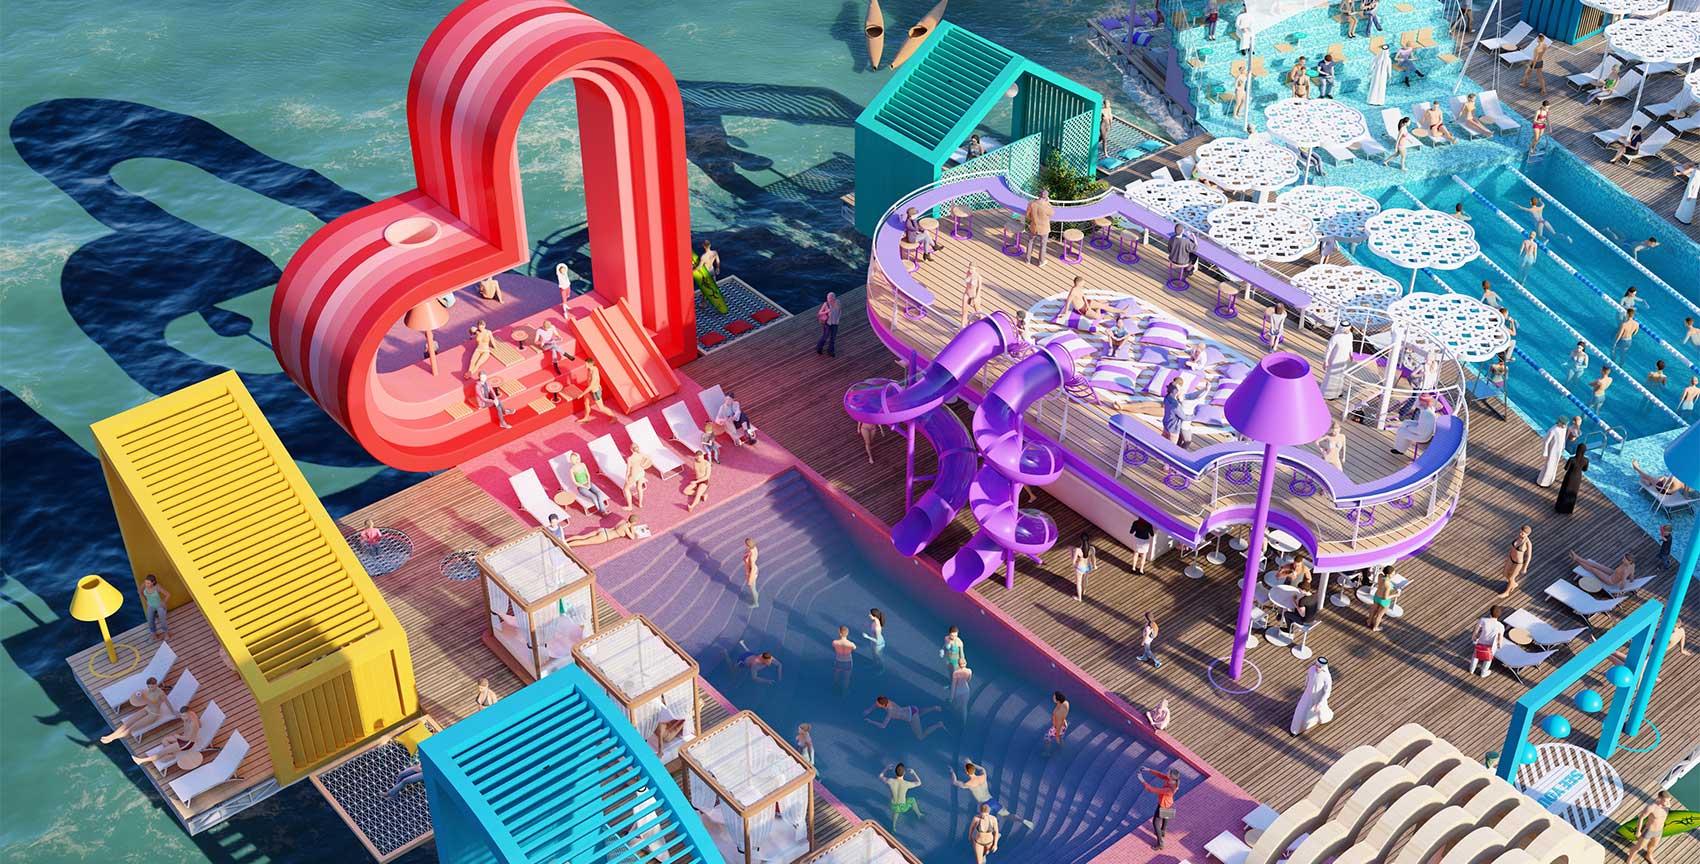 Wandering Pools: A revolutionary vision for floating urban recreation